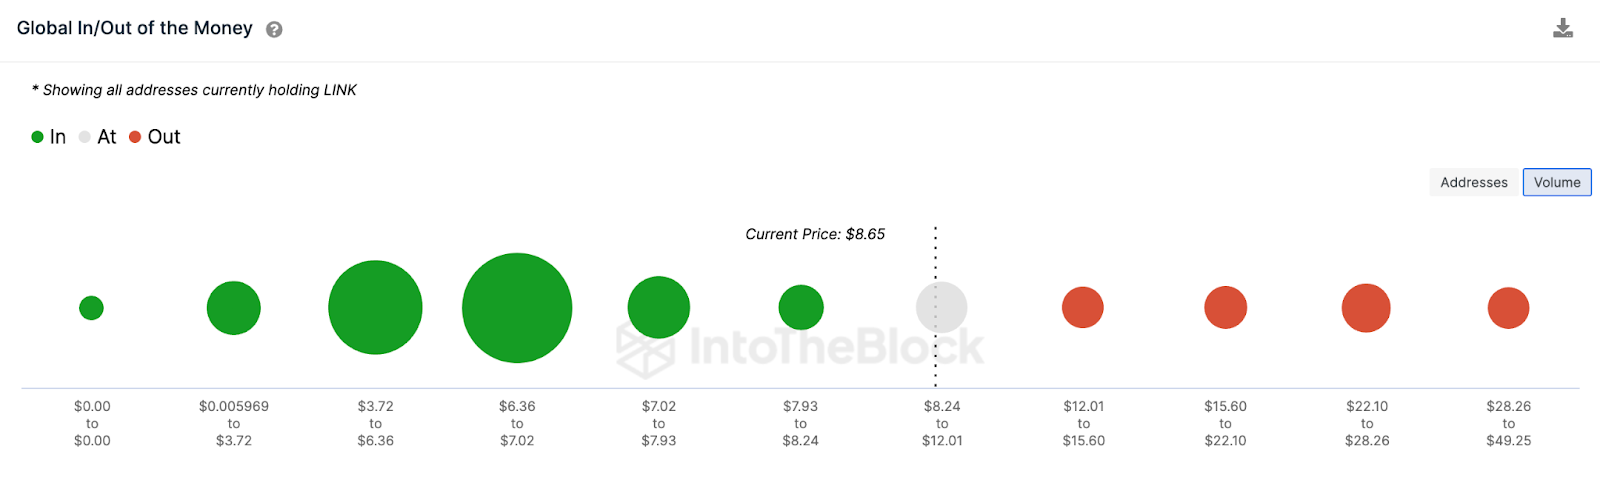 Avalanche (AVAX) Global In/Out of Money Price Distribution. April 2023. Source: IntoTheBlock